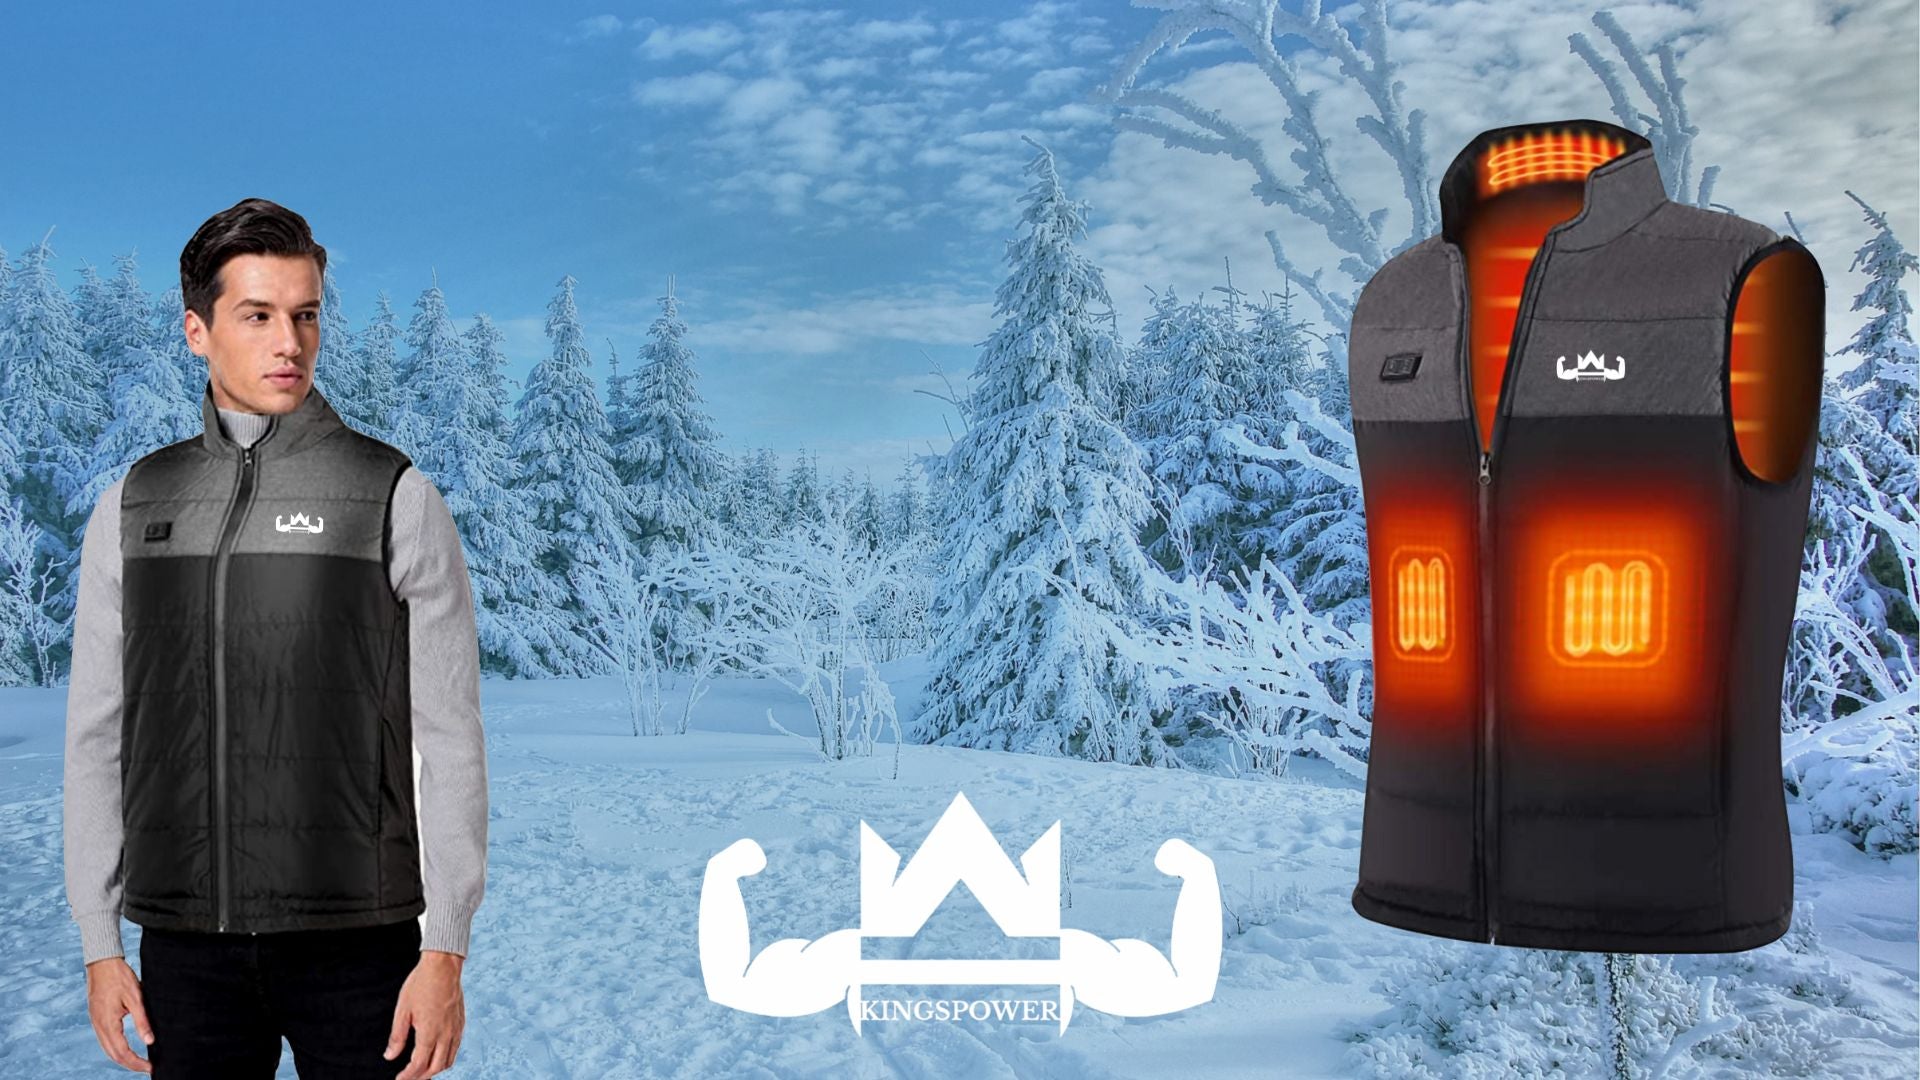 Indlæs video: Manual of how to use the heated body warmer.